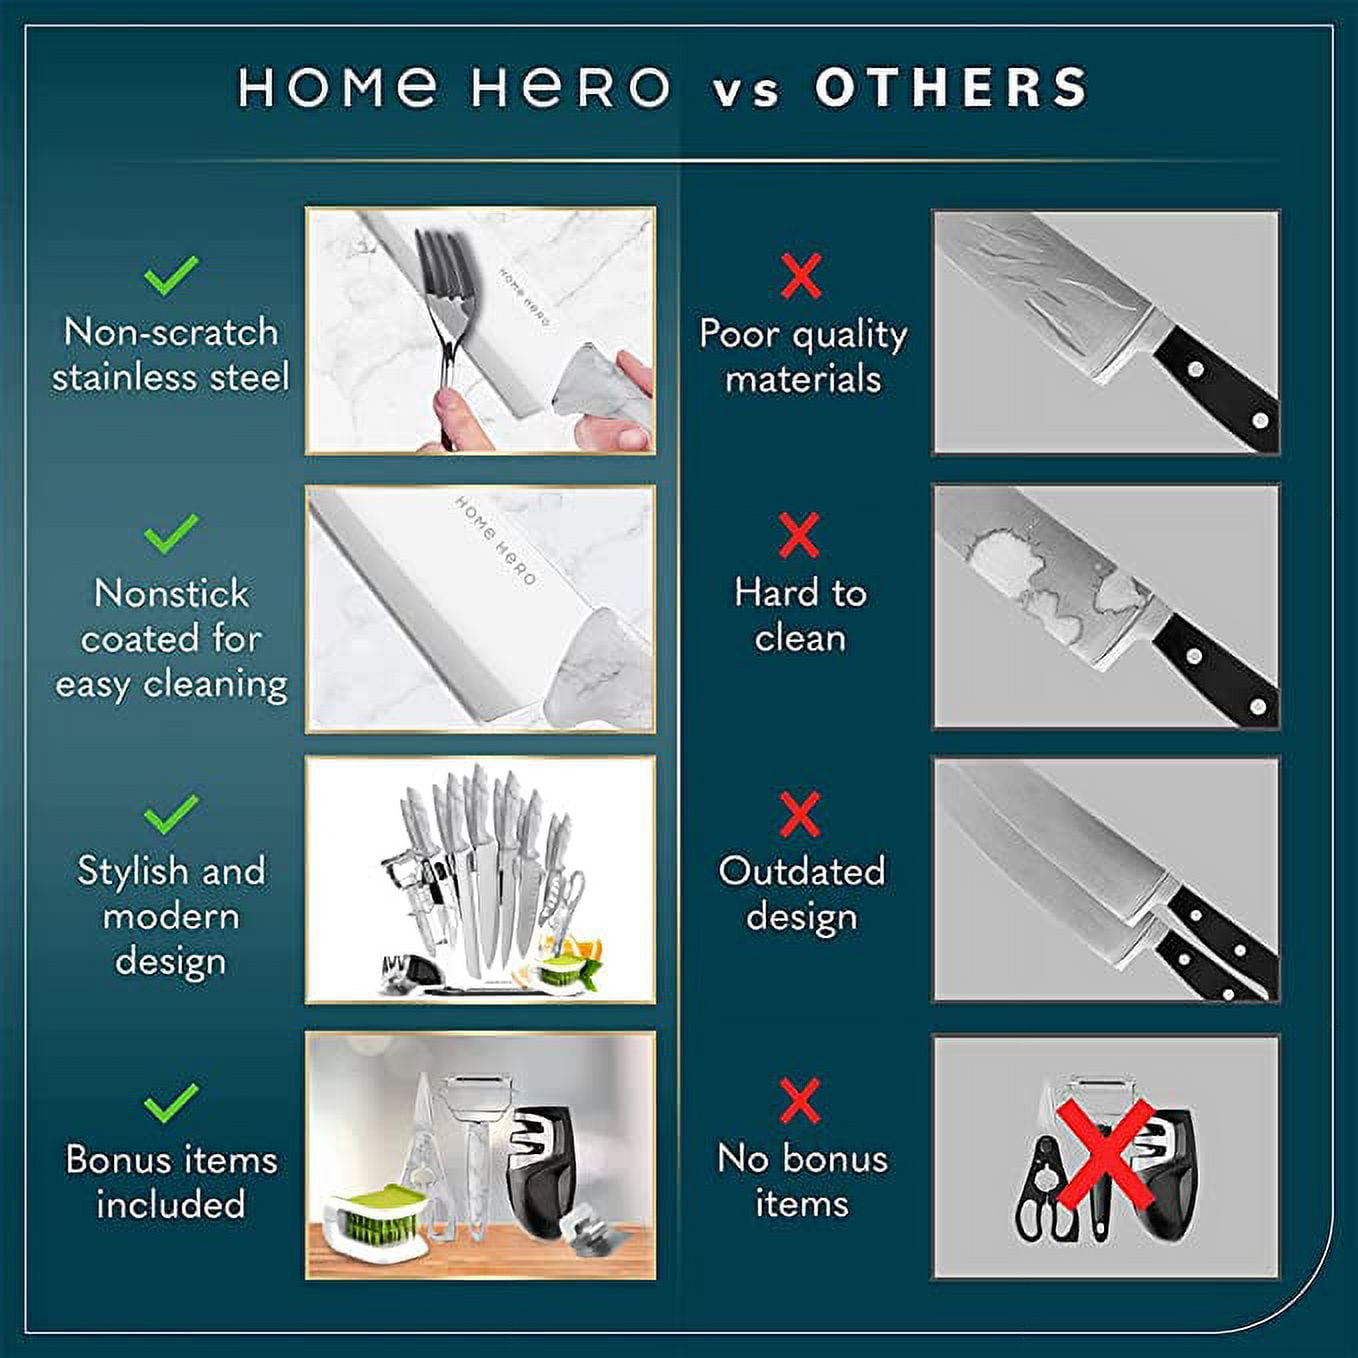 Home Hero - Kitchen Knives - Chef Knife Set w/ Block - Stainless Steel Kitchen Knives w/ Stand - Black, 5 Pieces